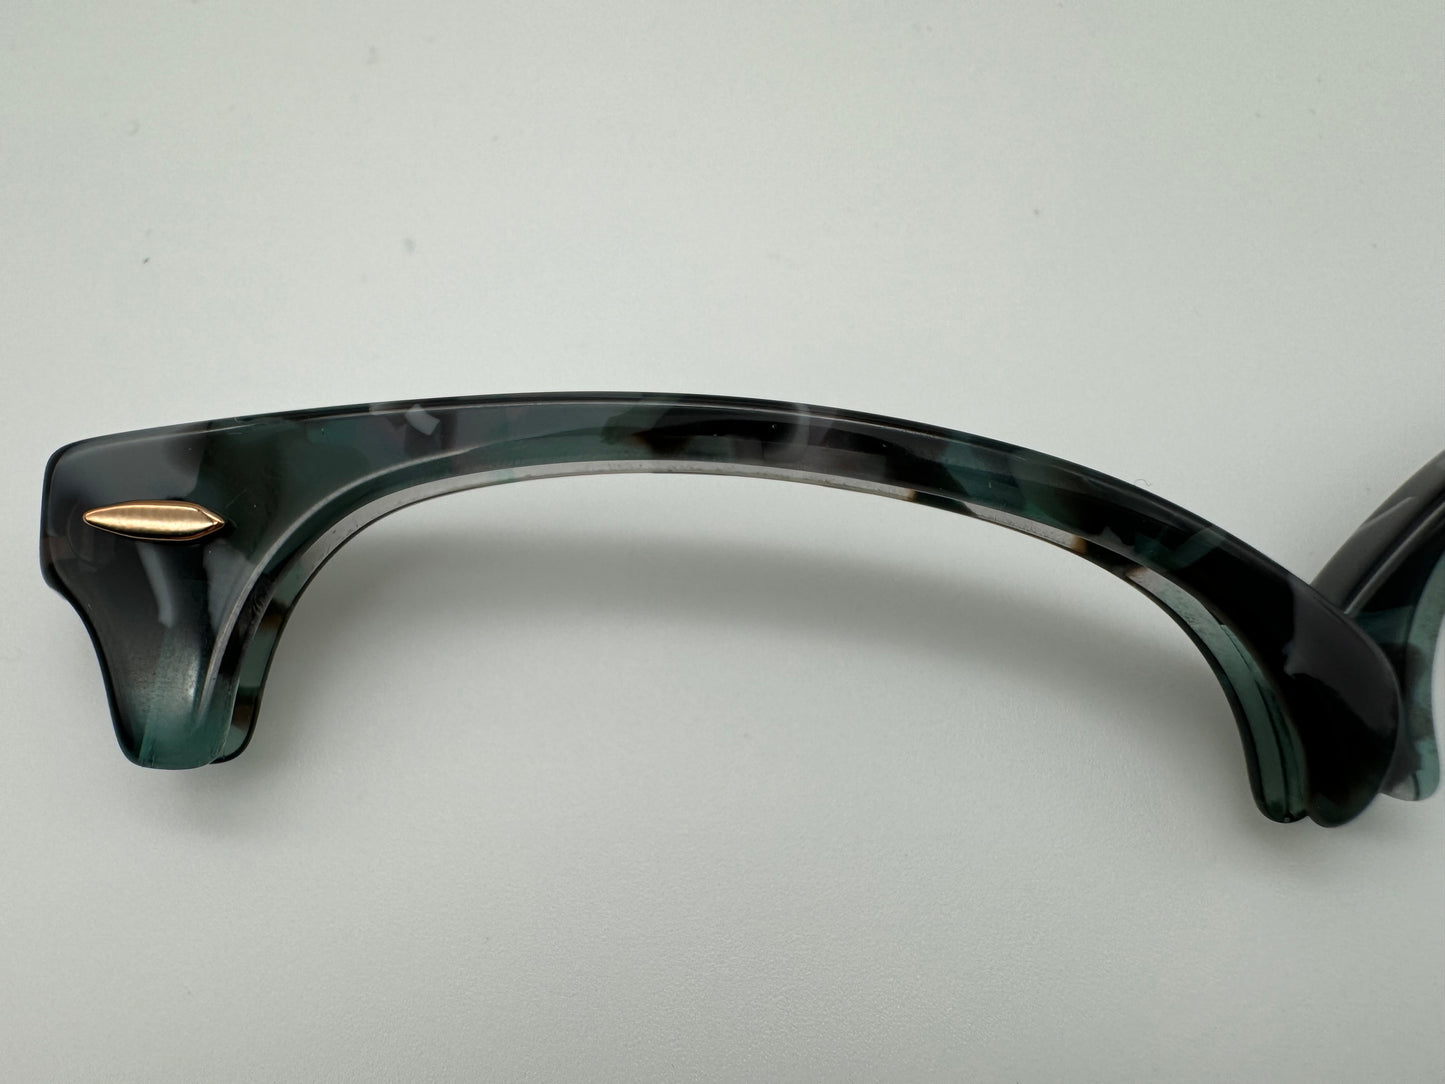 Genuine Ray Ban RB3016 Clubmaster Replacement Gray Green Tortoise Fleck Front Browbars 49mm Authentic NEW